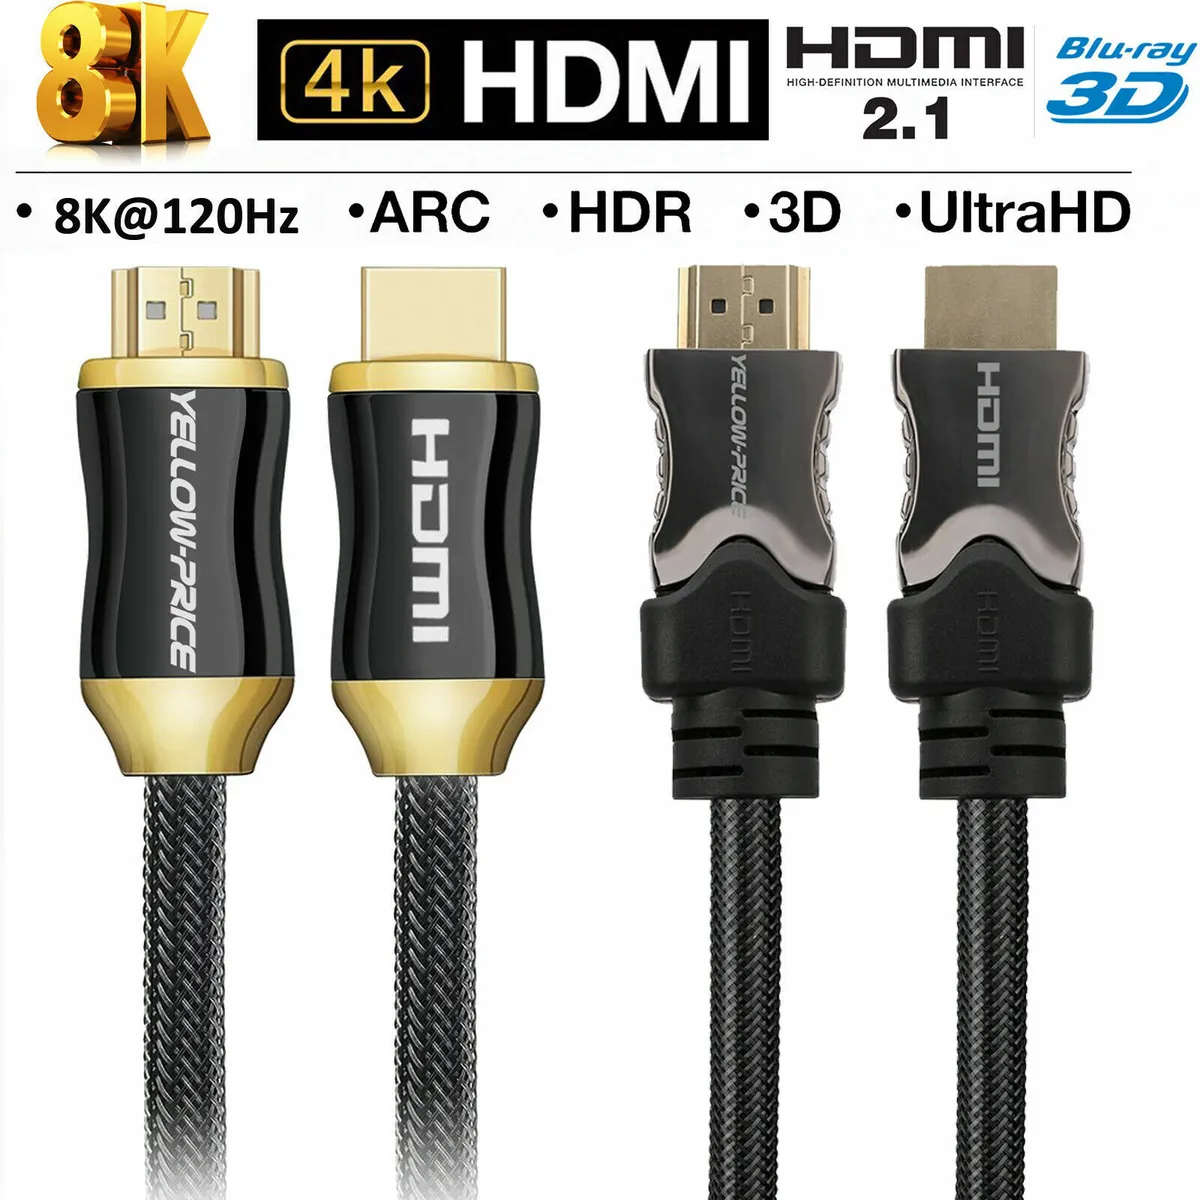 Braided HDMI Cable 2.1 2.0 Long 10ft 25ft 50ft 8K@120Hz, 4K@60Hz, 48Gbps  HDR lot